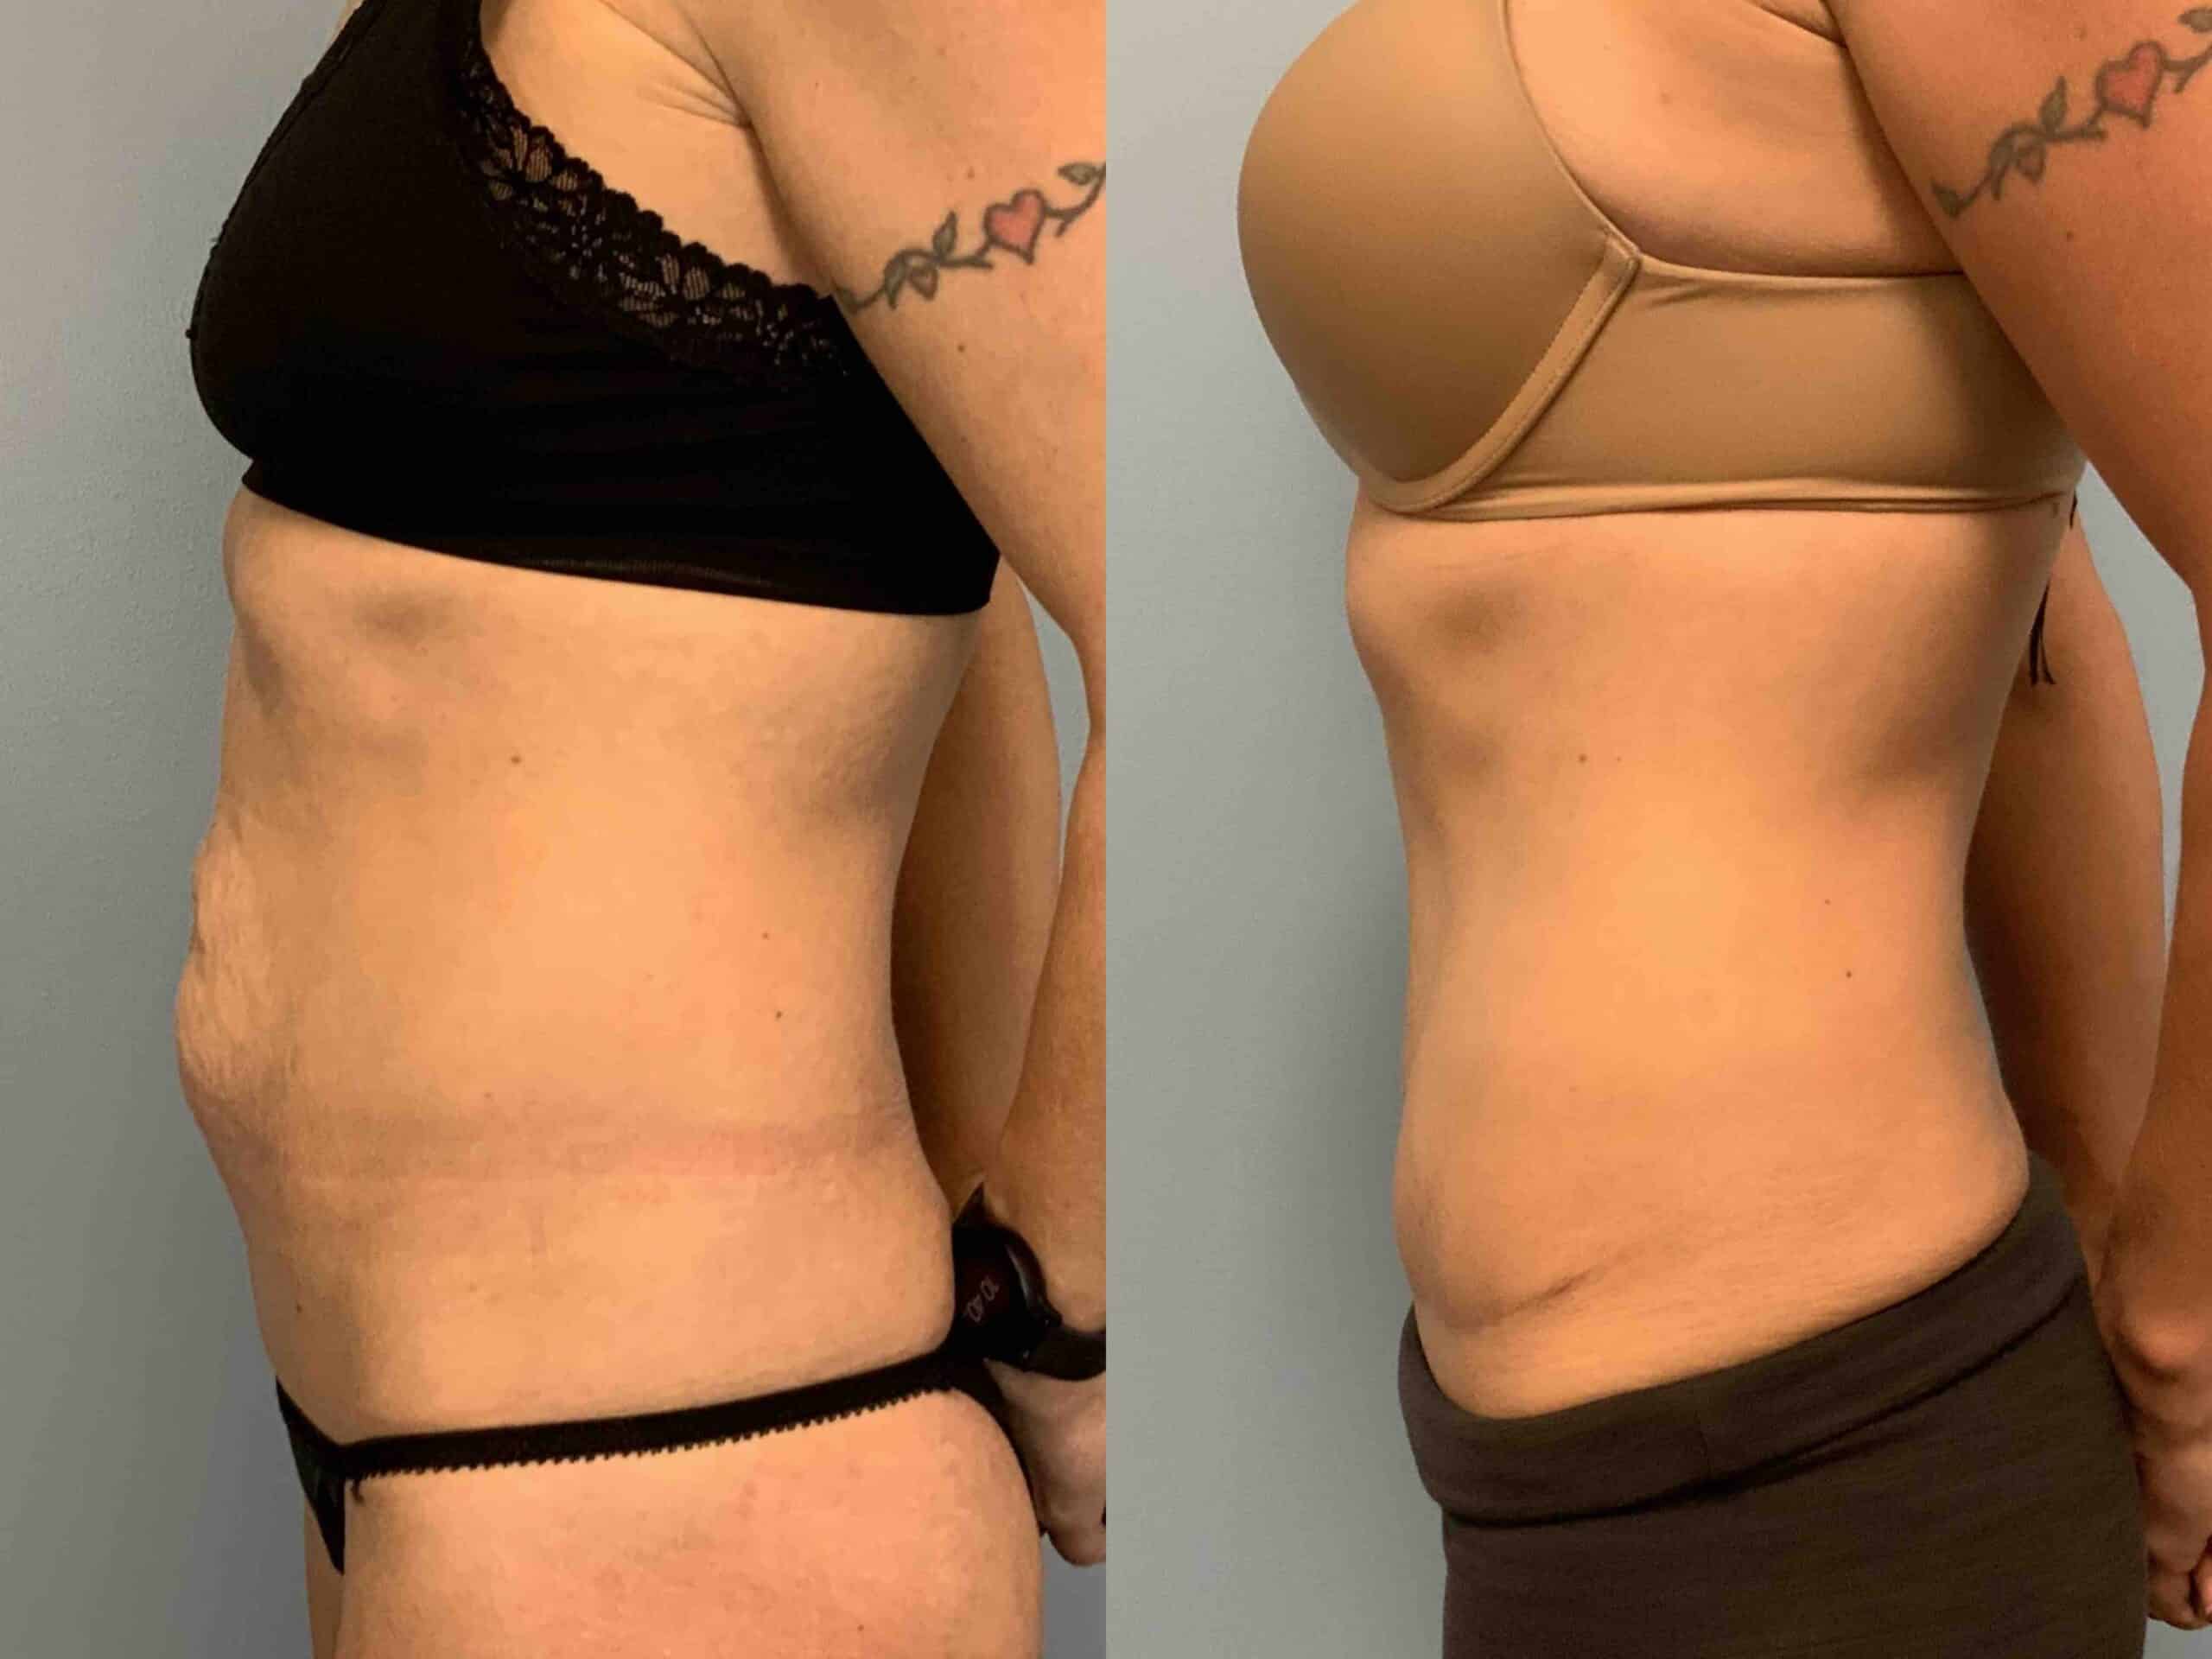 Before and after, patient 5 mo post op from Renuvion Abdomen and Flanks, VASER Abdomen and Flanks,Tummy Tuck with Umbilical Hernia Repair procedures performed by Dr. Paul Vanek